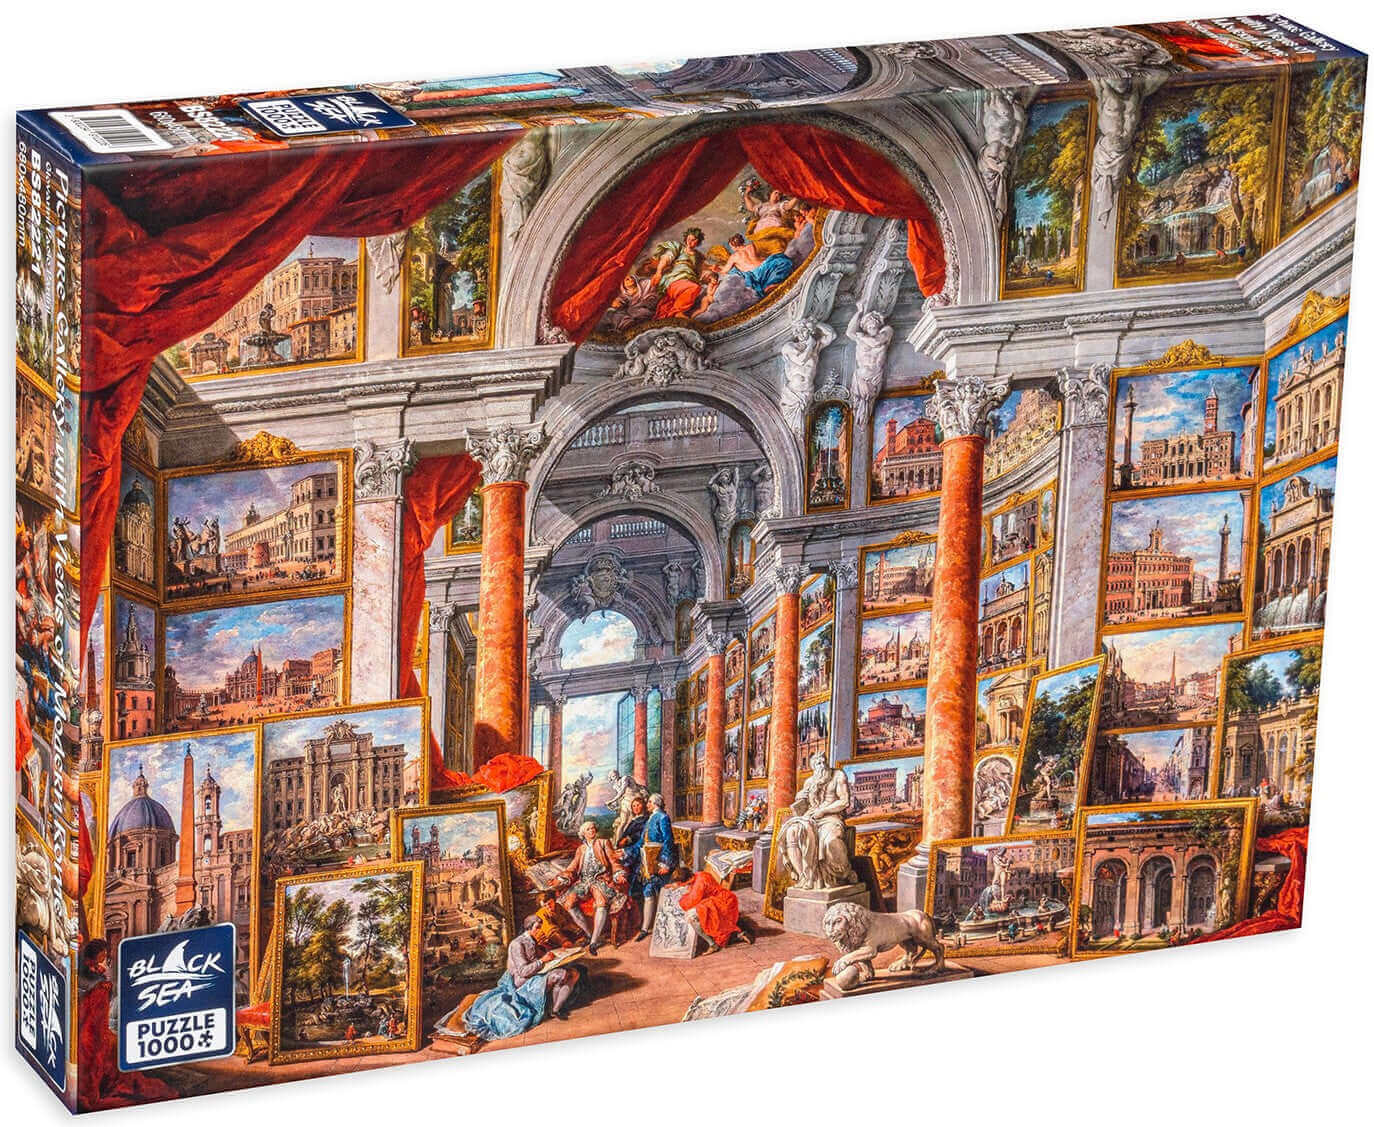 Puzzle Black Sea 1000 pieces - Picture Gallery with Views of Modern Rome, -